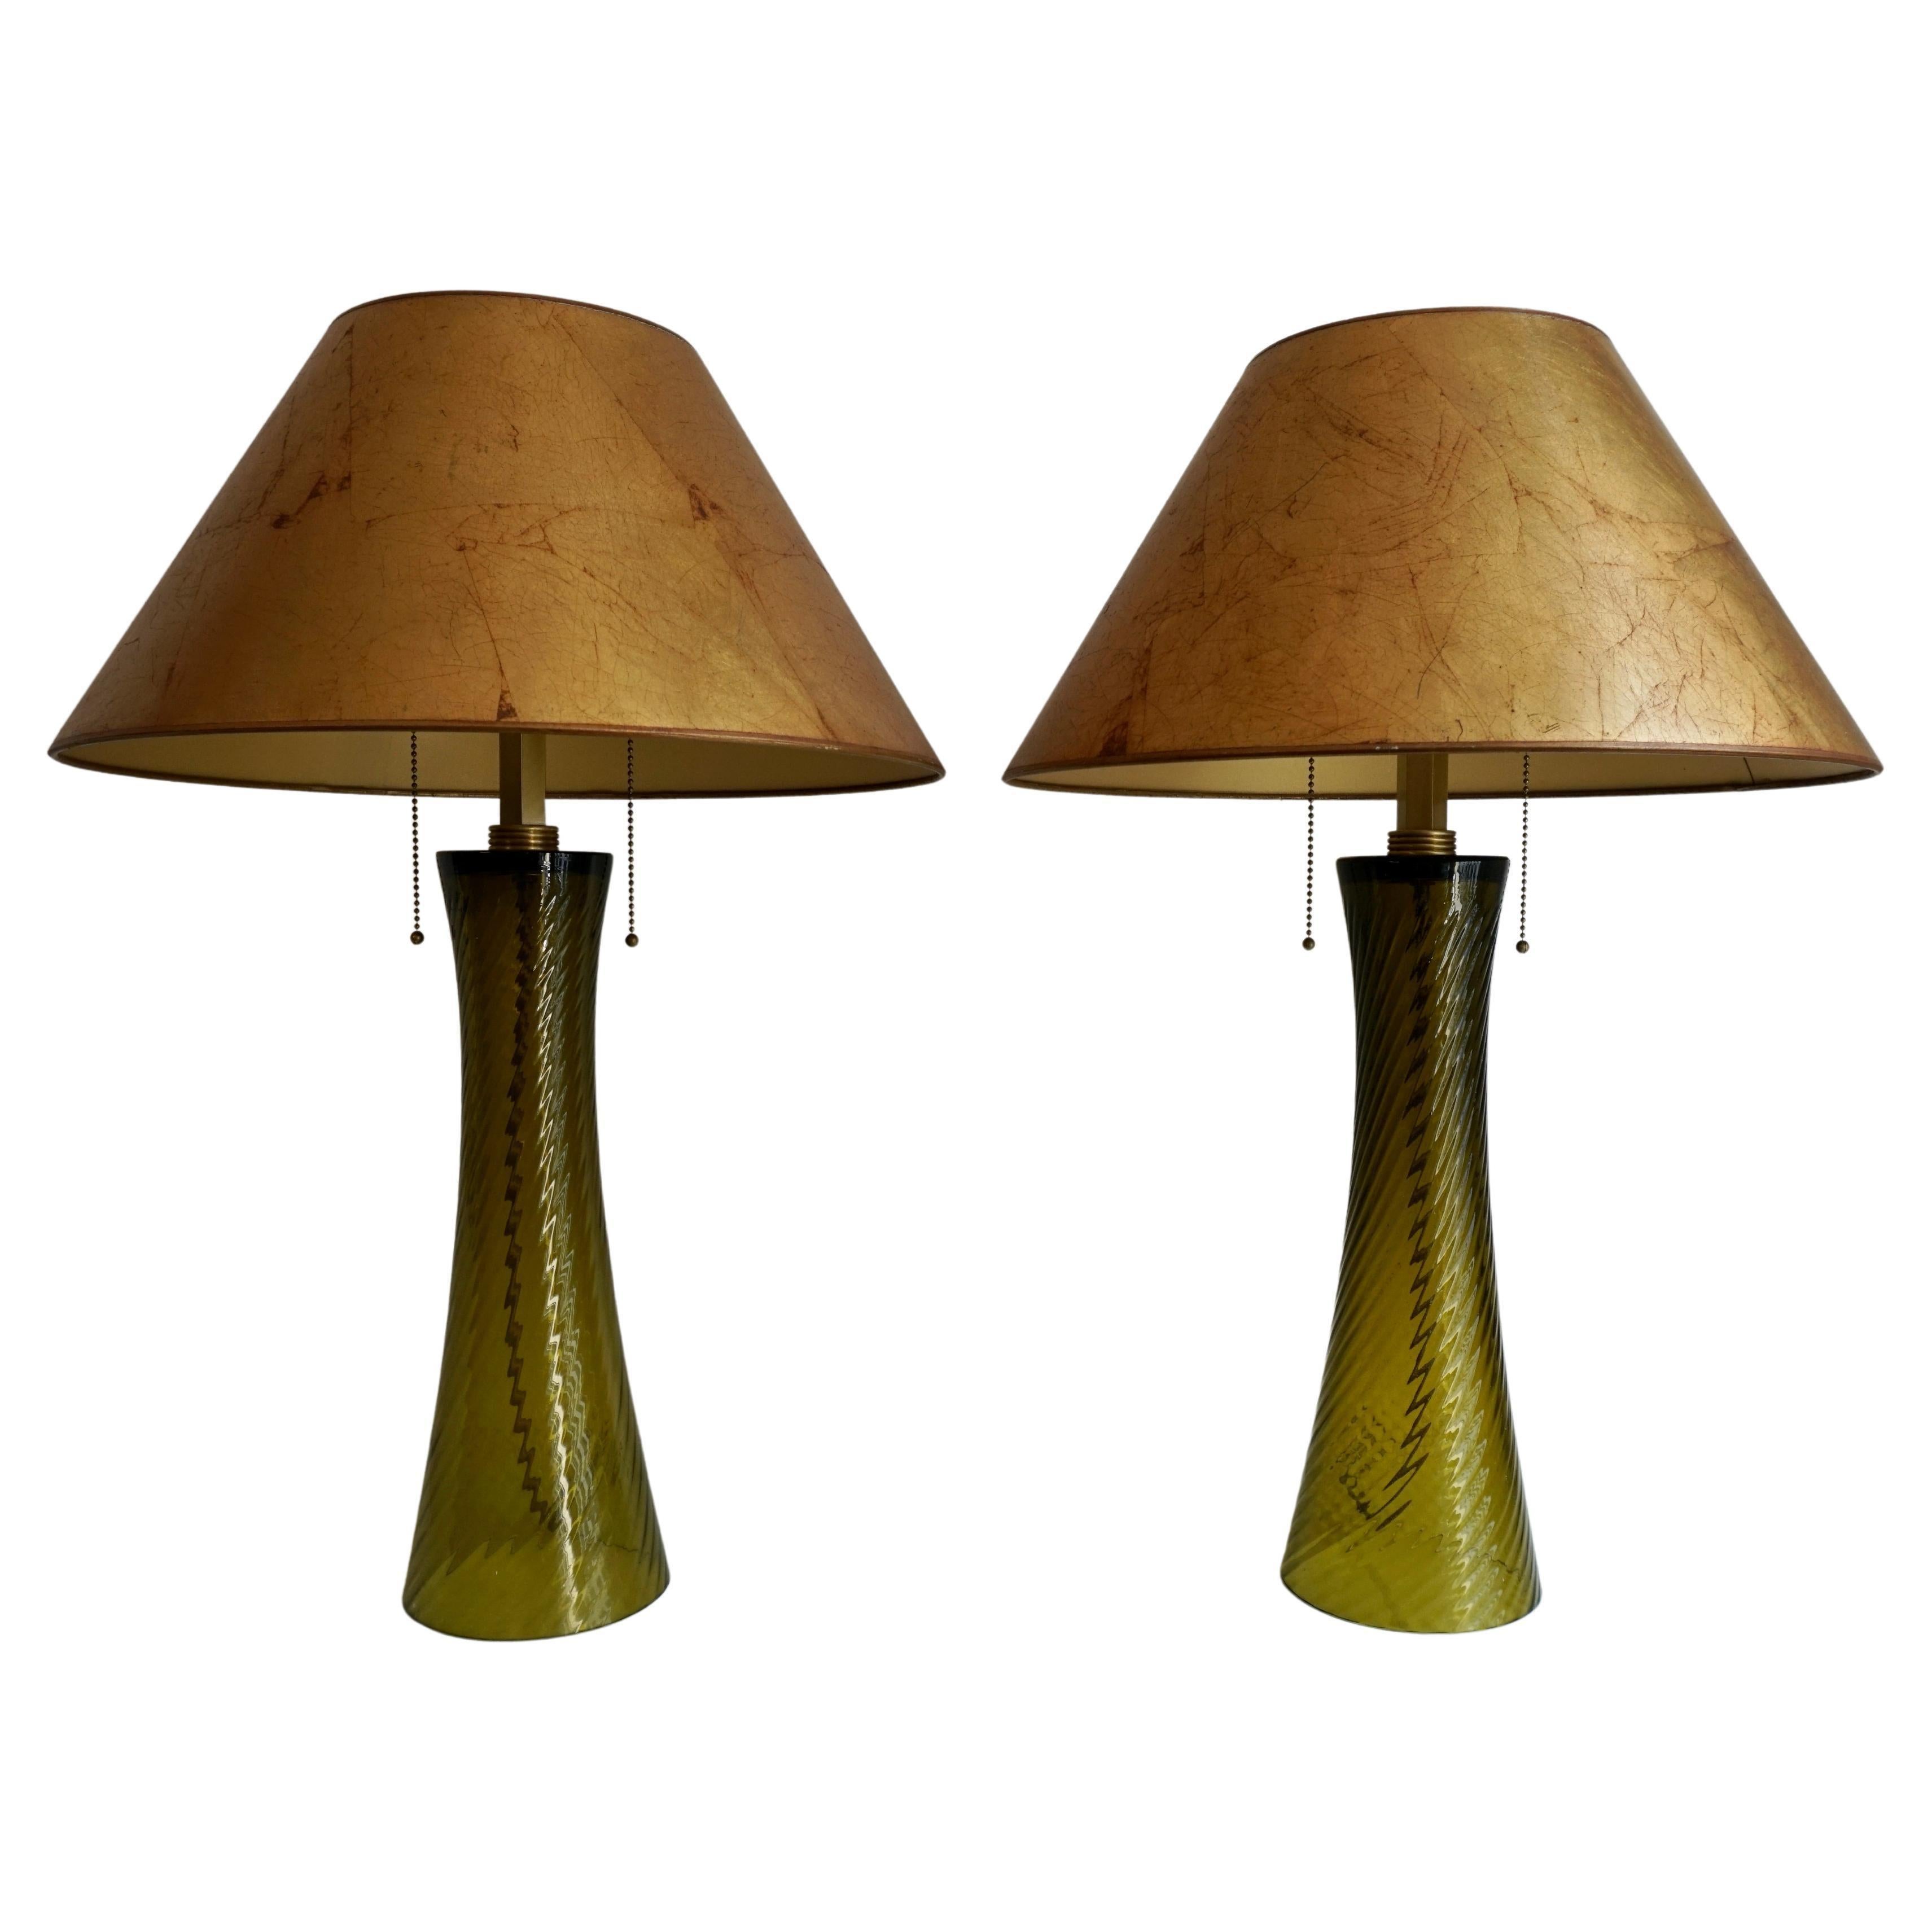 Two beautiful elegant green colored glass lamps with the original patinated gold colored shade.
Signed with the monogram J.H.

Height 28.7